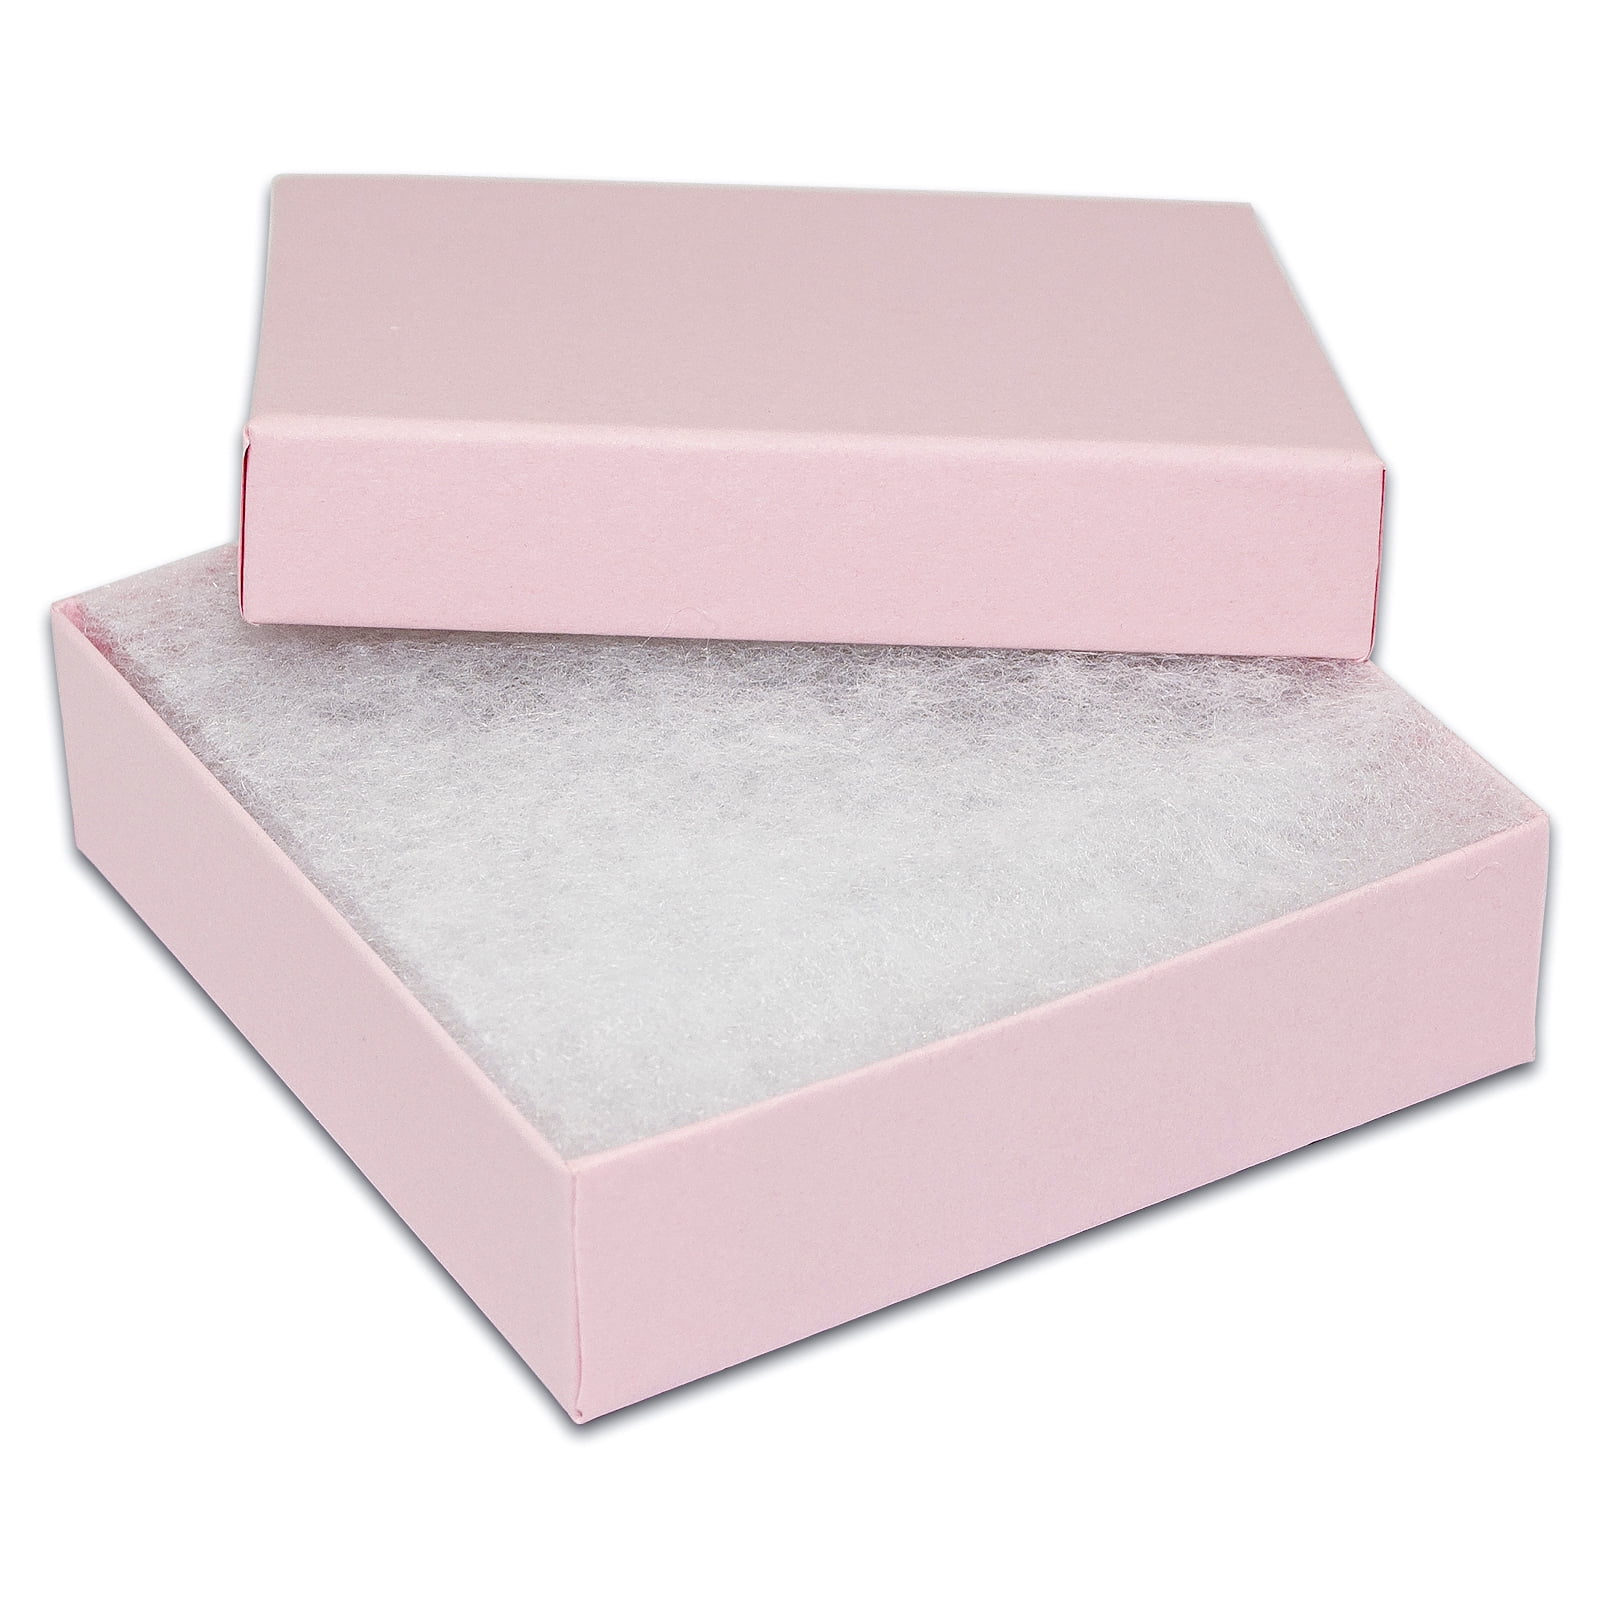 Silver Foil 2 5/8x1 1/2x1 inches #21 The Display Guys Pack of 25 Cotton Filled Cardboard Paper Silver Jewelry Box Gift Case 